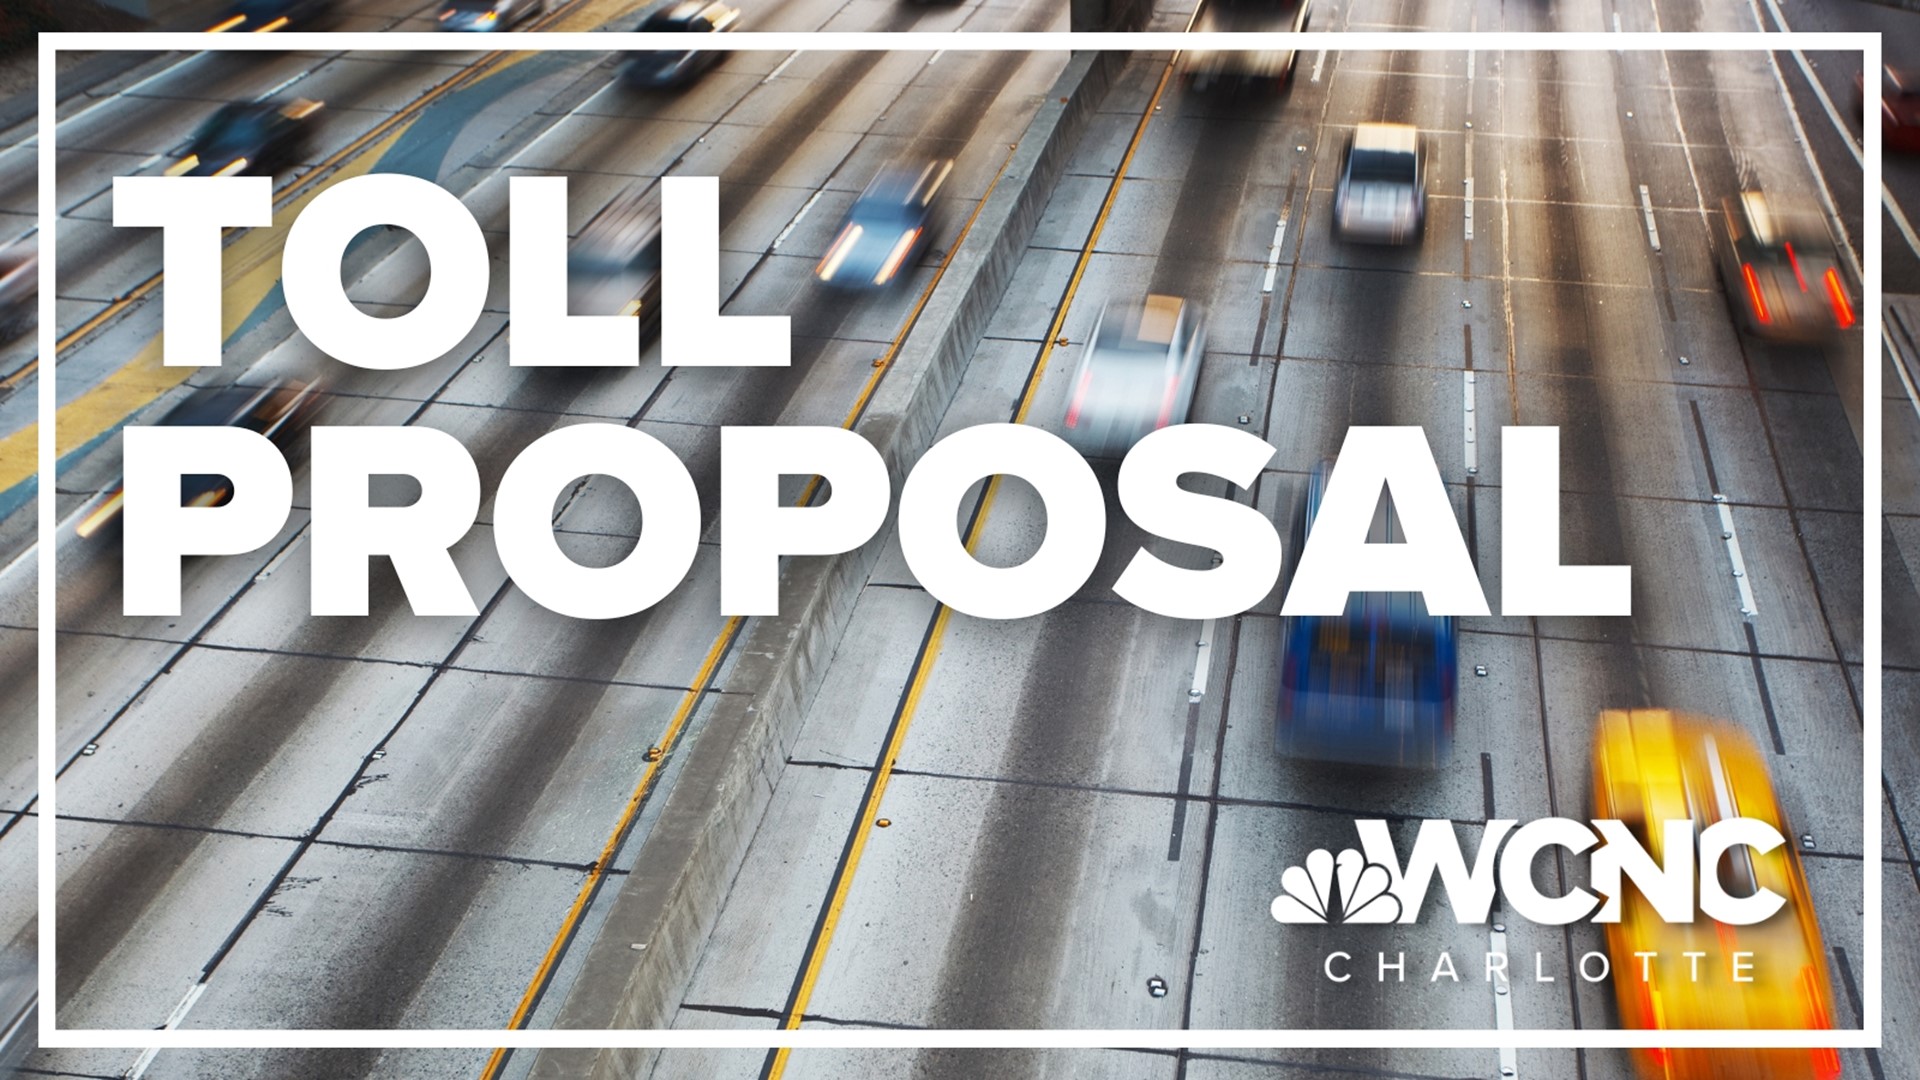 The plan would put up tolls from Uptown down to the South Carolina state line.